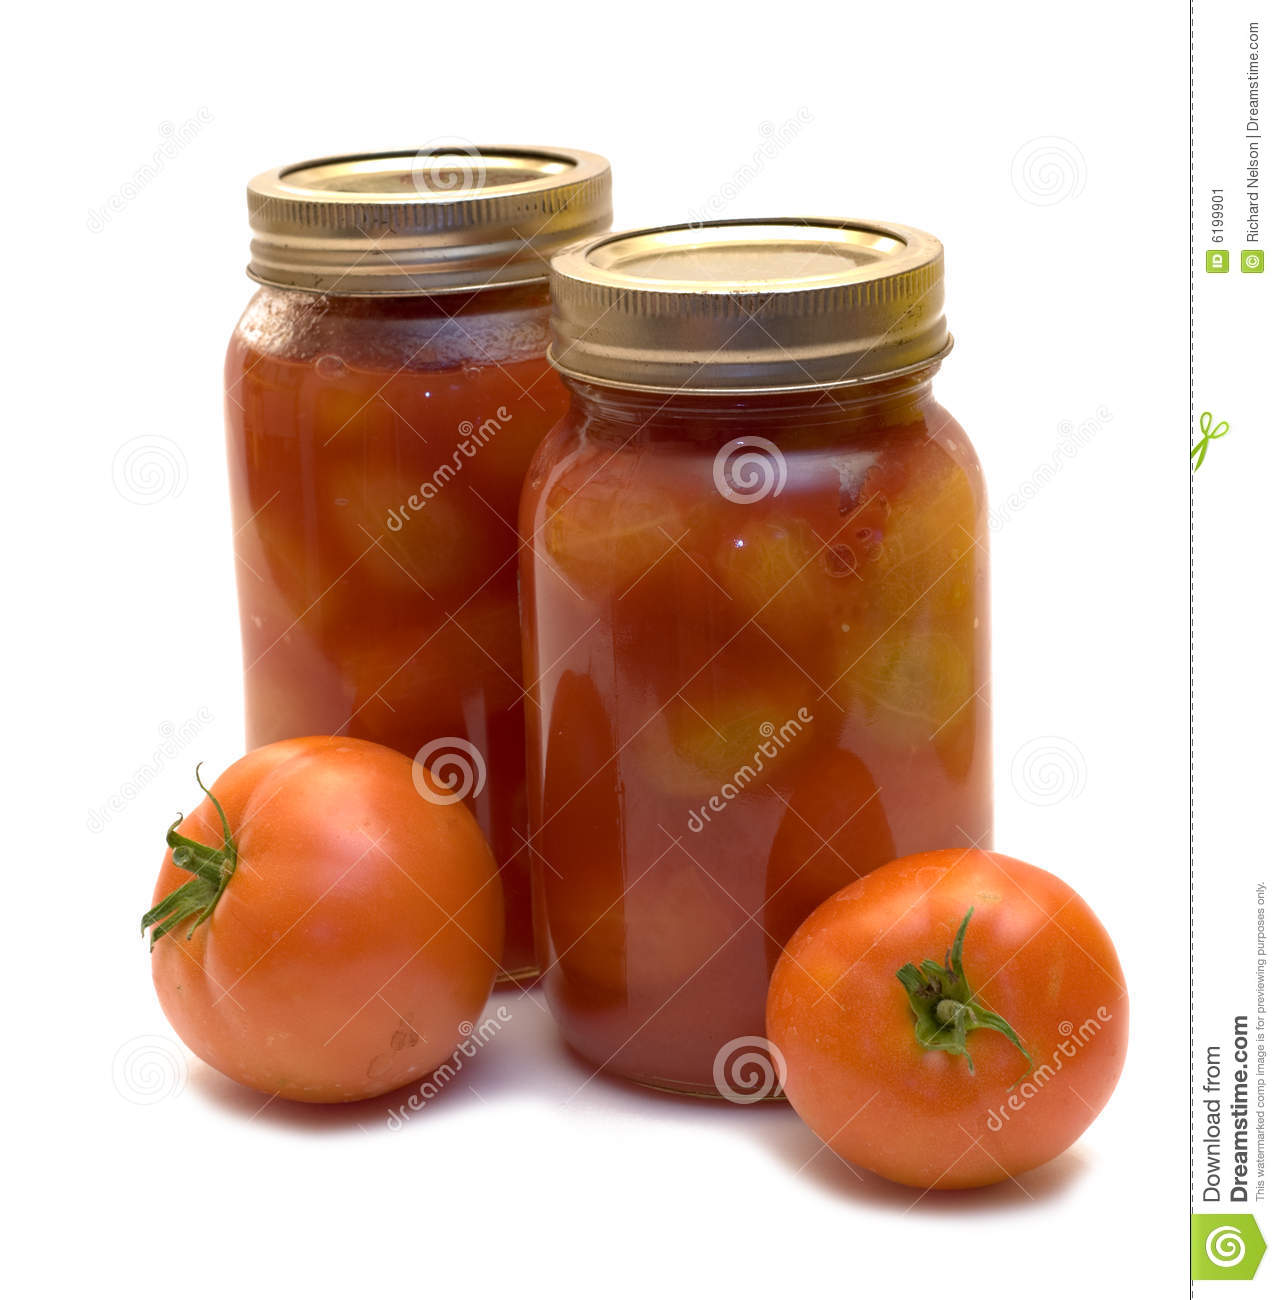 Home Canning Stock Image   Image  6199901